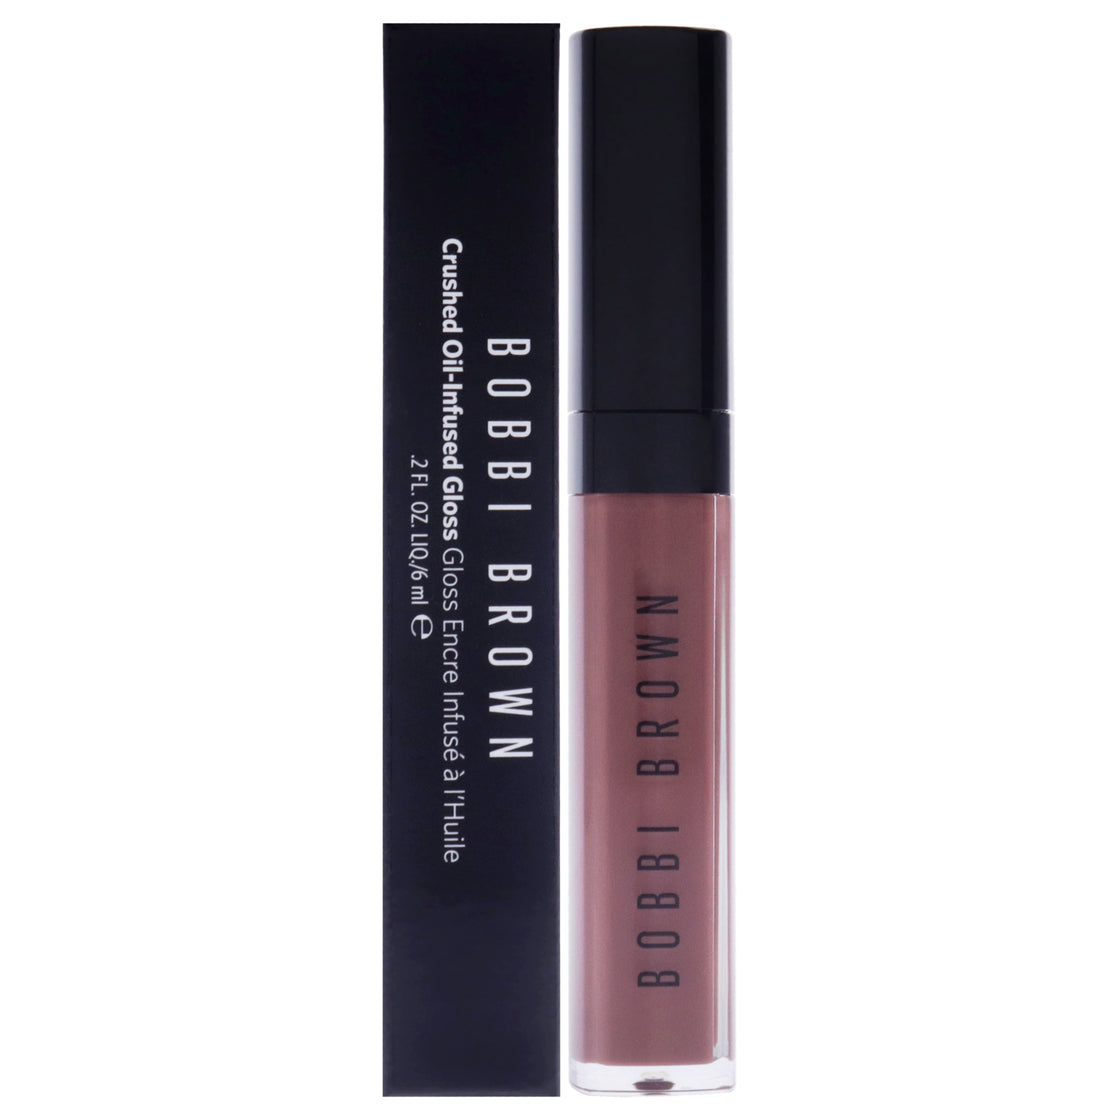 Crushed Oil-Infused Gloss - Force of Nature by Bobbi Brown for Women - 0.2 oz Lip Gloss